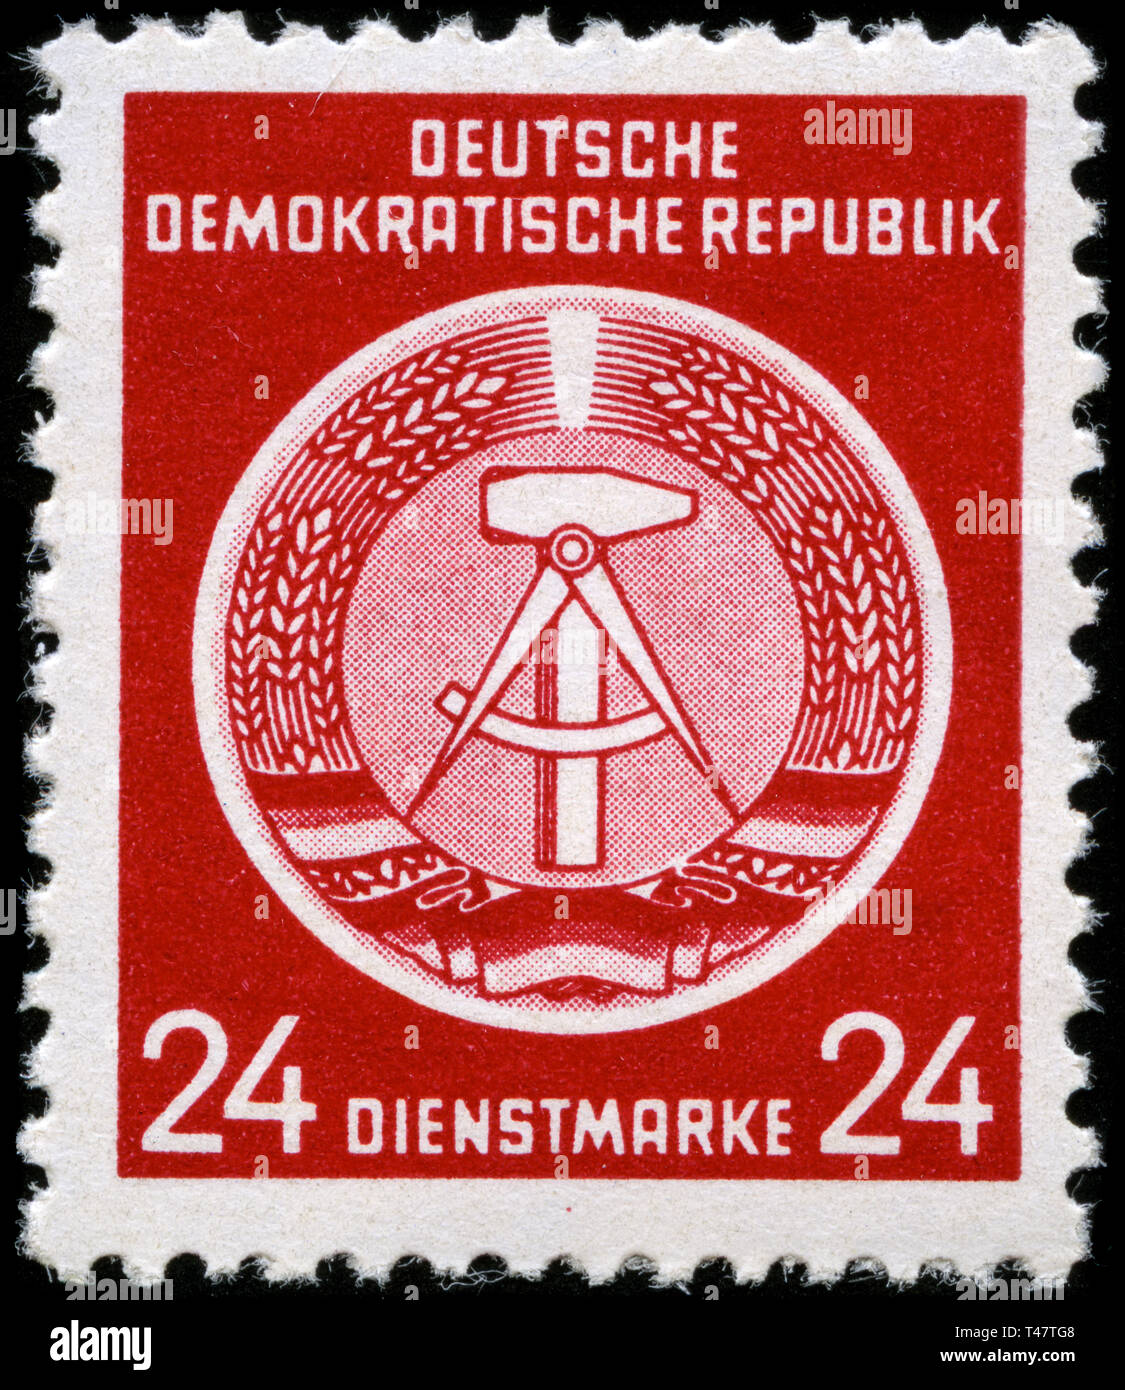 Postage stamp from East Germany (DDR)  in the Hammer and Compass (Offset) series issued in 1954 Stock Photo